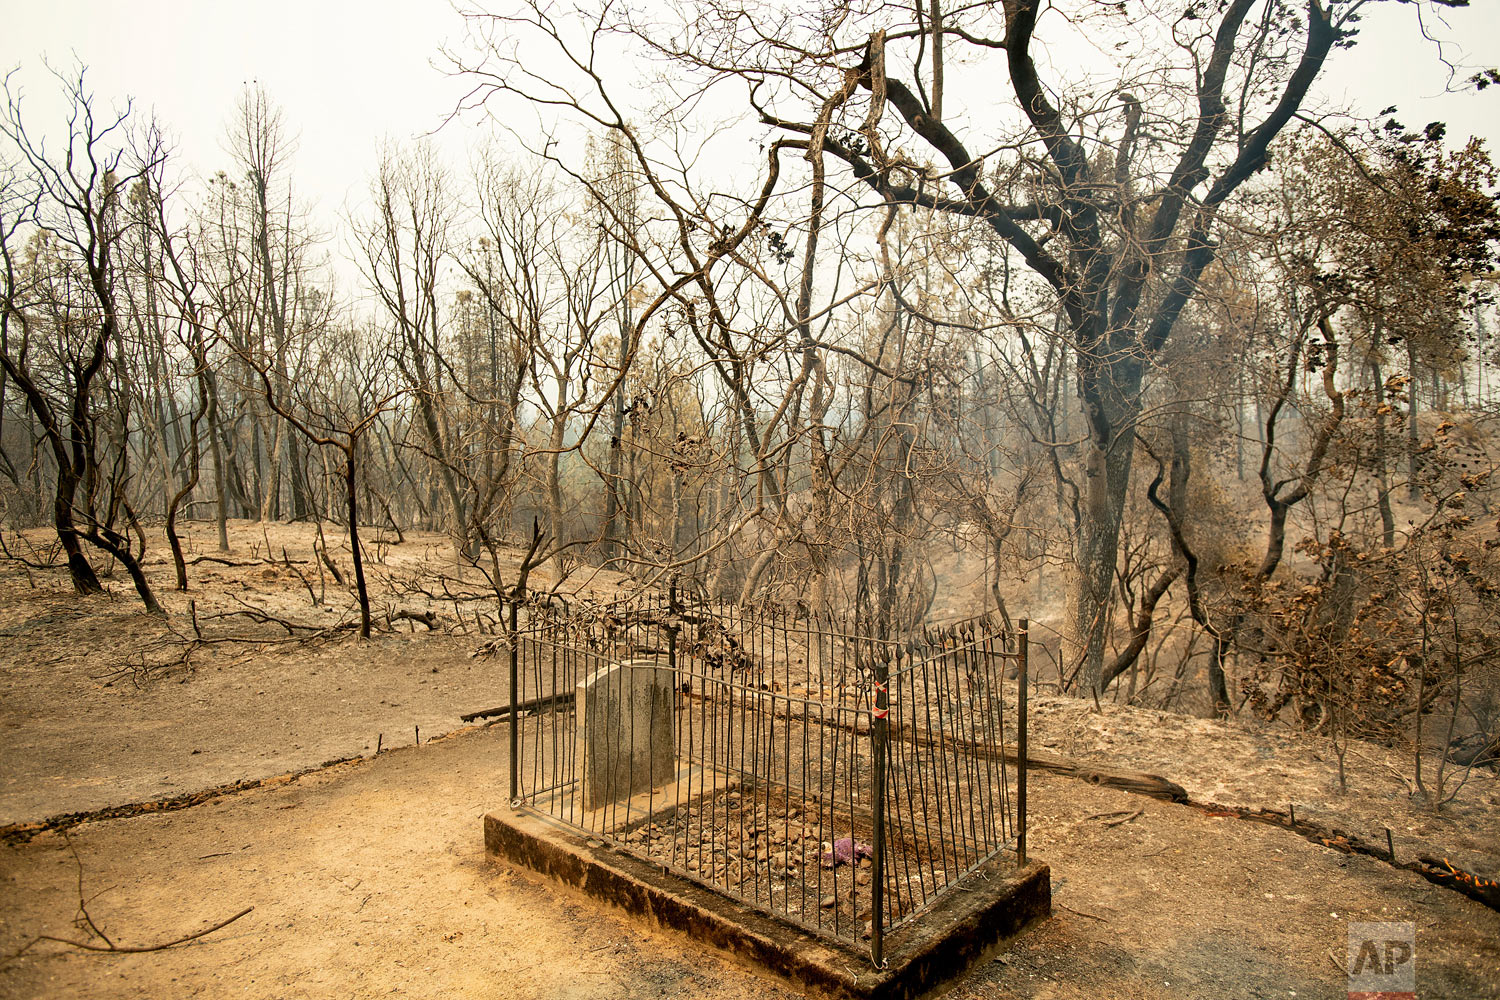  The historic Pioneer Baby's Grave rests among trees scorched by the Carr Fire in Shasta, Calif., on Friday, July 27, 2018. The fire rapidly expanded Thursday when erratic flames swept through the historic Gold Rush town of Shasta and nearby Keswick,